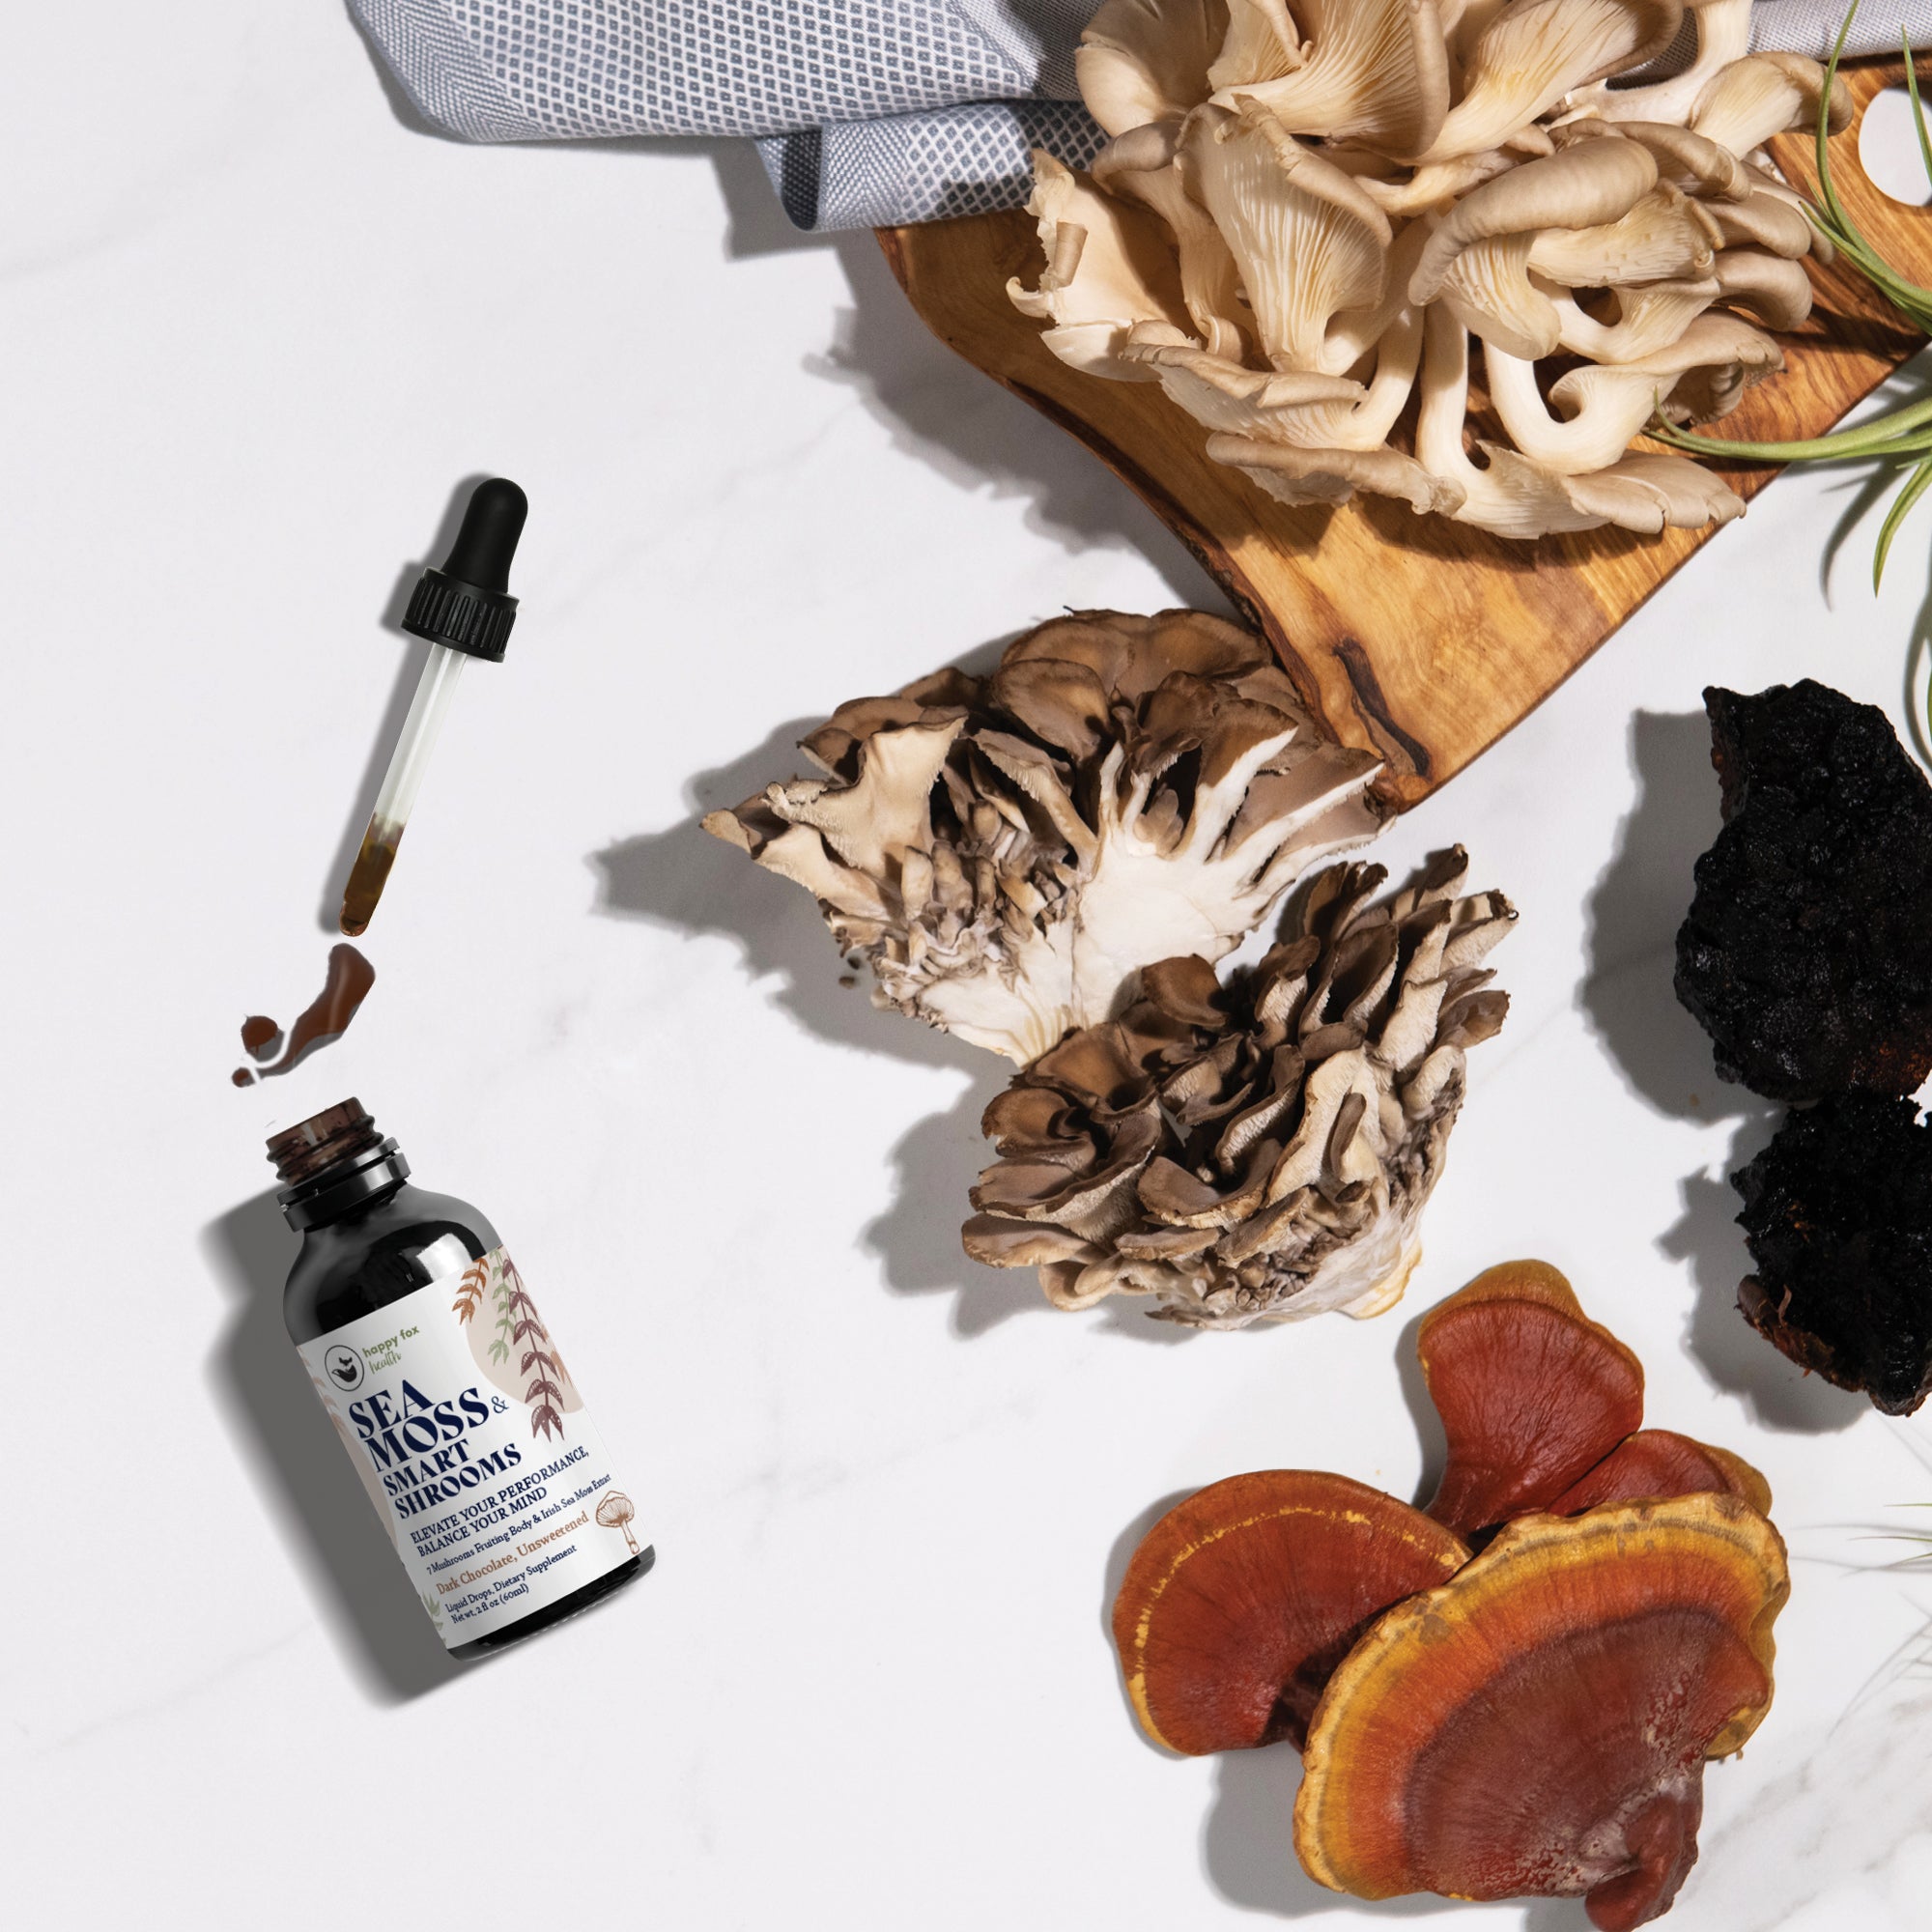 SEA MOSS + SMART SHROOMS LIQUID DROPS | Elevate Your Performance, Balance Your Mind